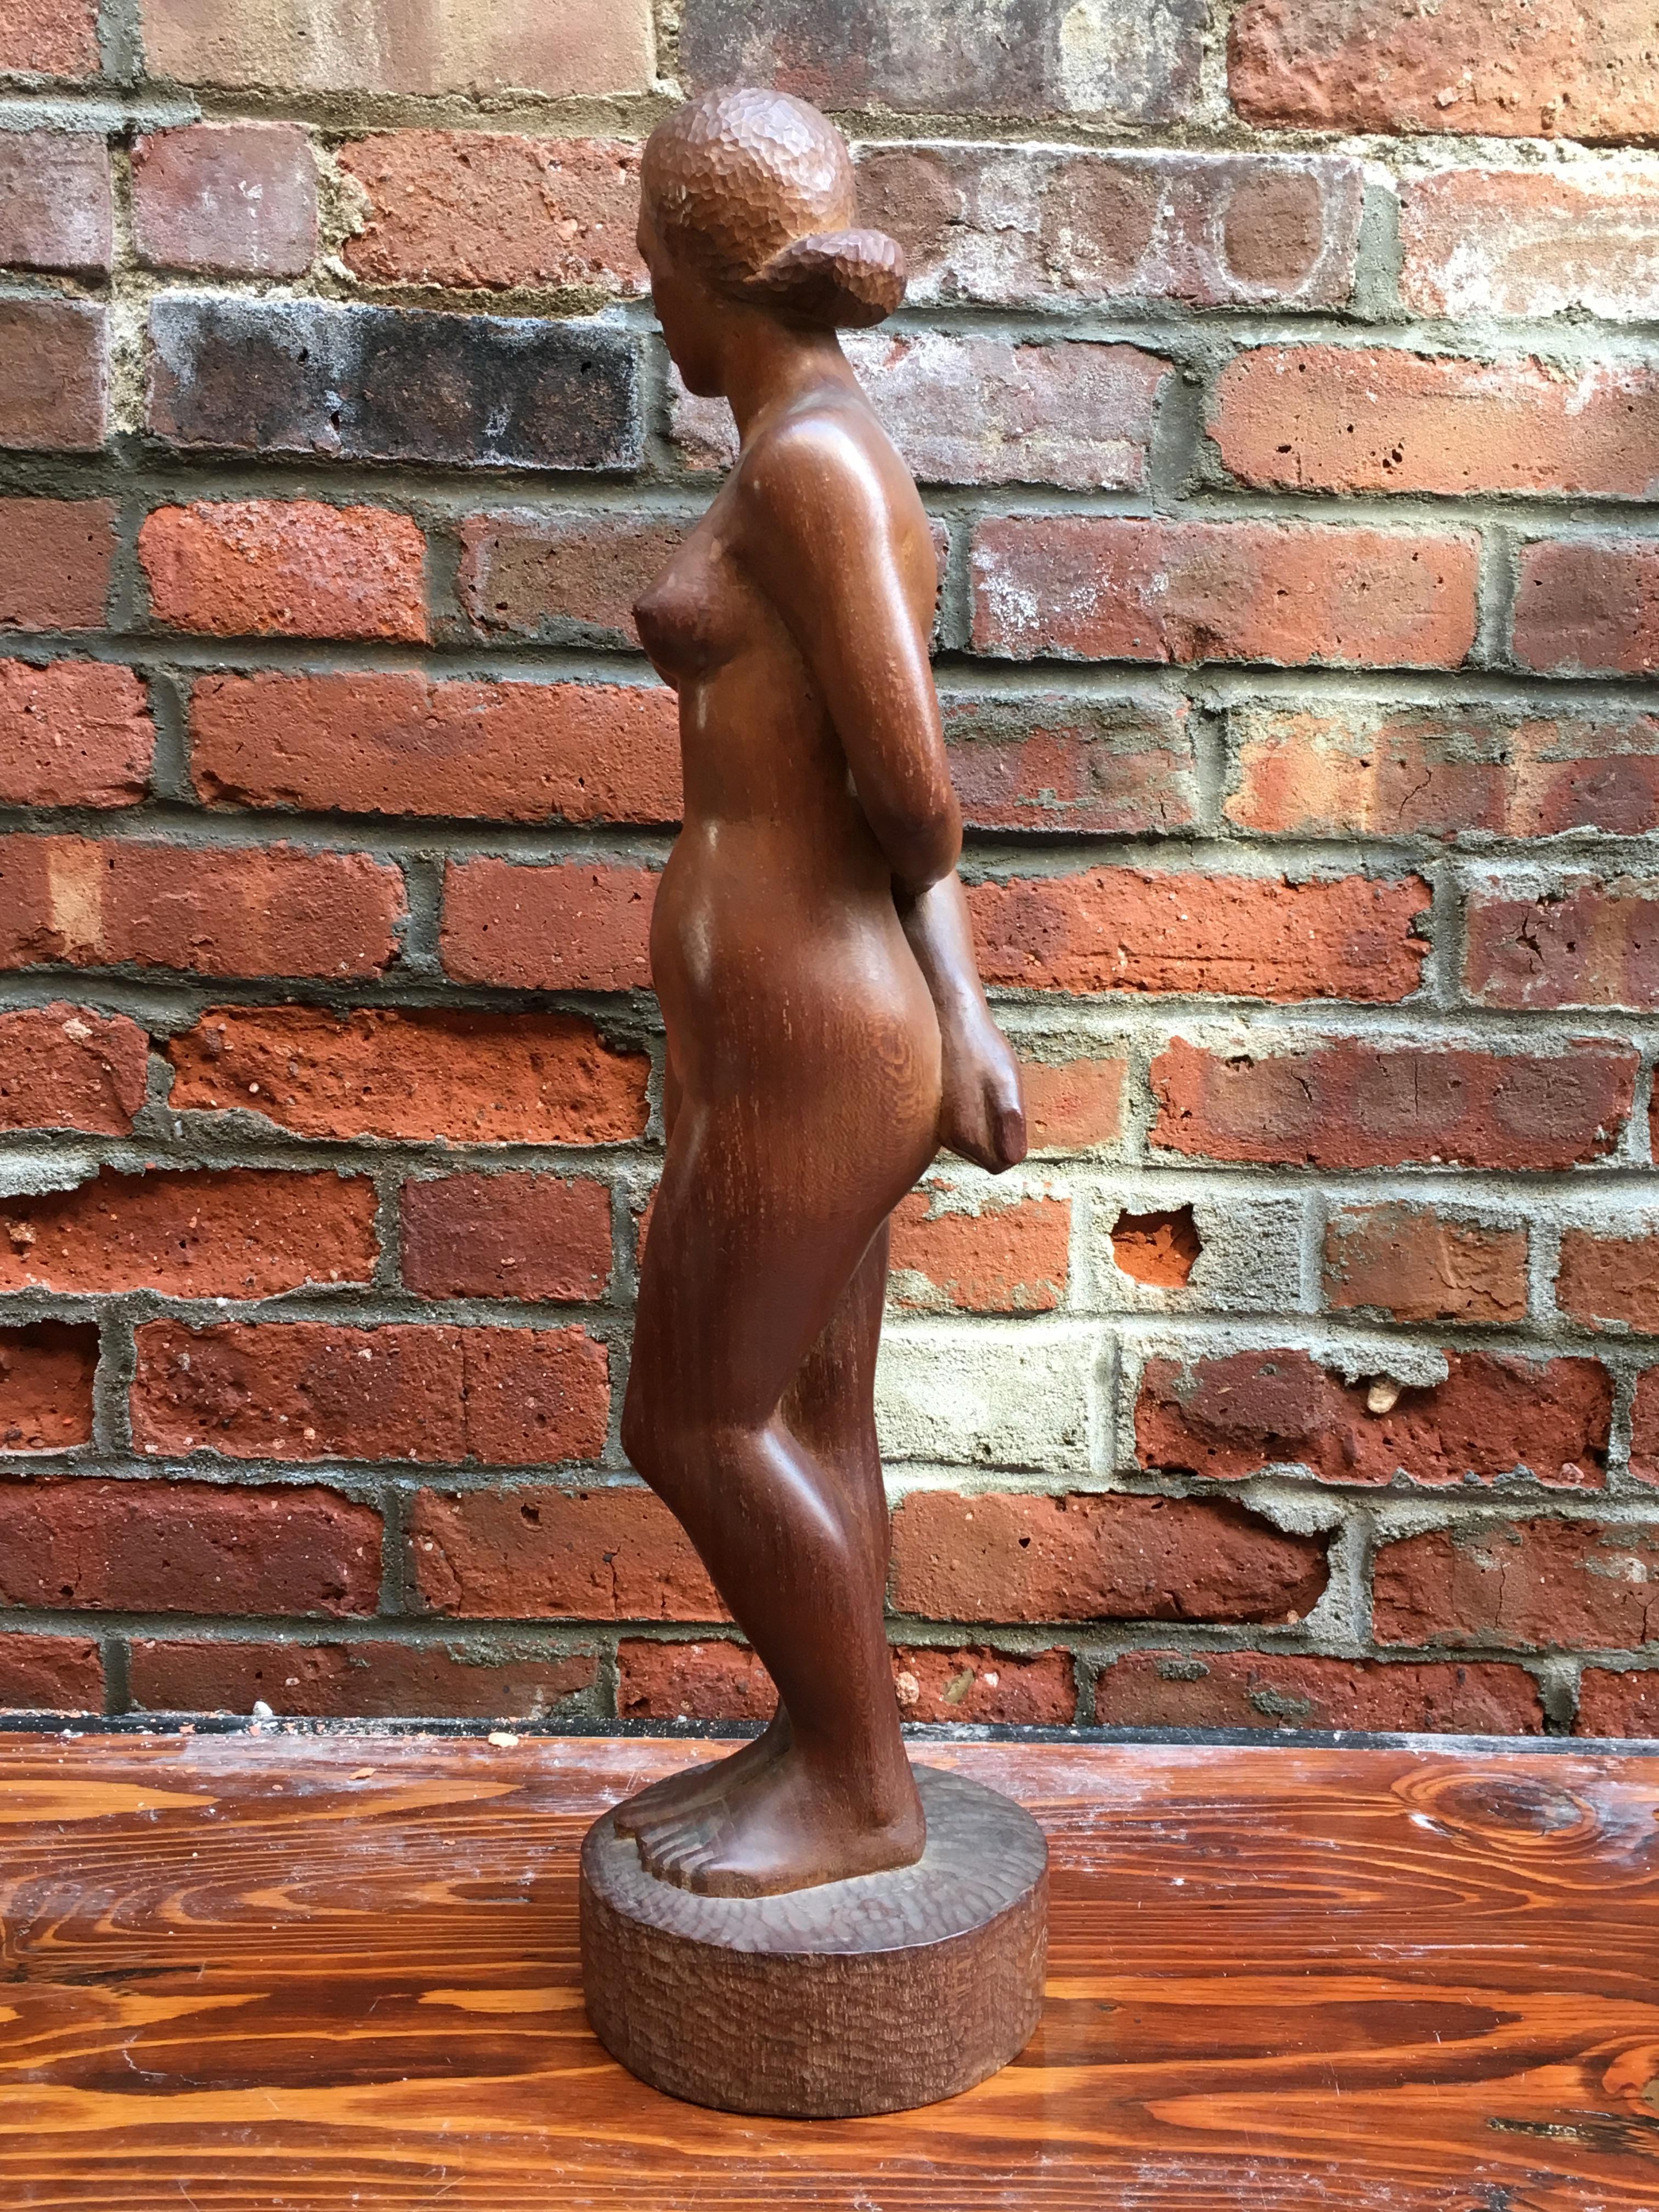 Solid wood carved life study sculpture, circa 1948. Signed A. Tolin and dated 1948. The Tolin sculptures offered here on 1stdibs come from a wonderful UWS, NYC apartment that was 